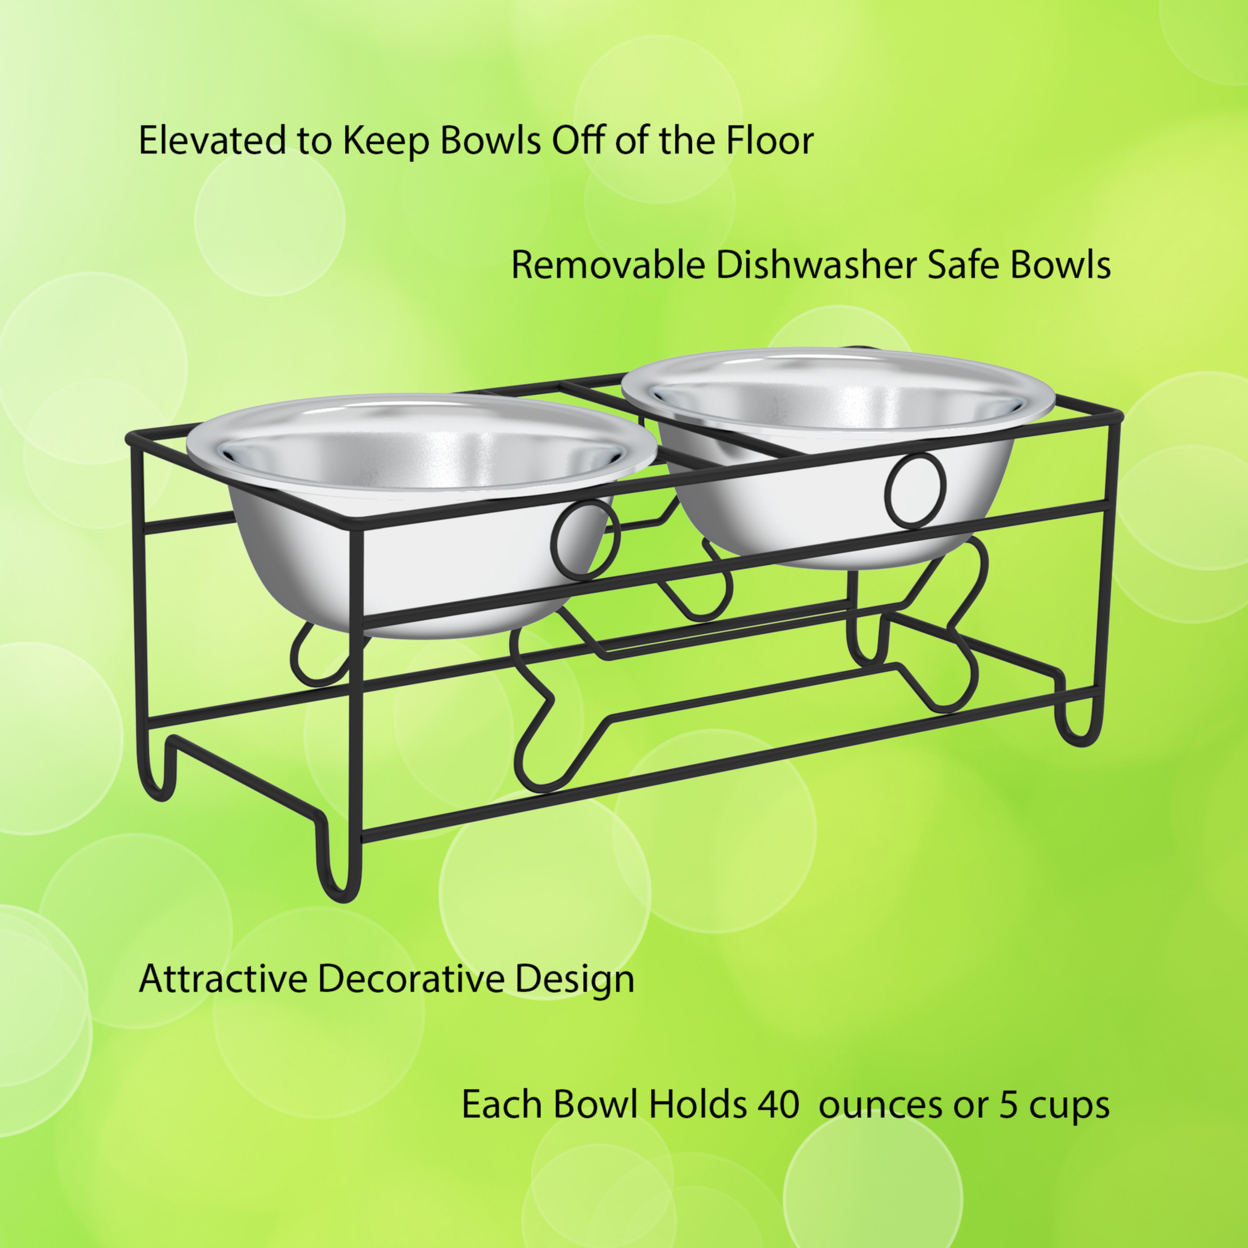 Stainless Steel Raised Food And Water Bowls Bone Decor 6.5 Inch Tall Stand For Dogs And Cats-2 Bowls, 40 Oz